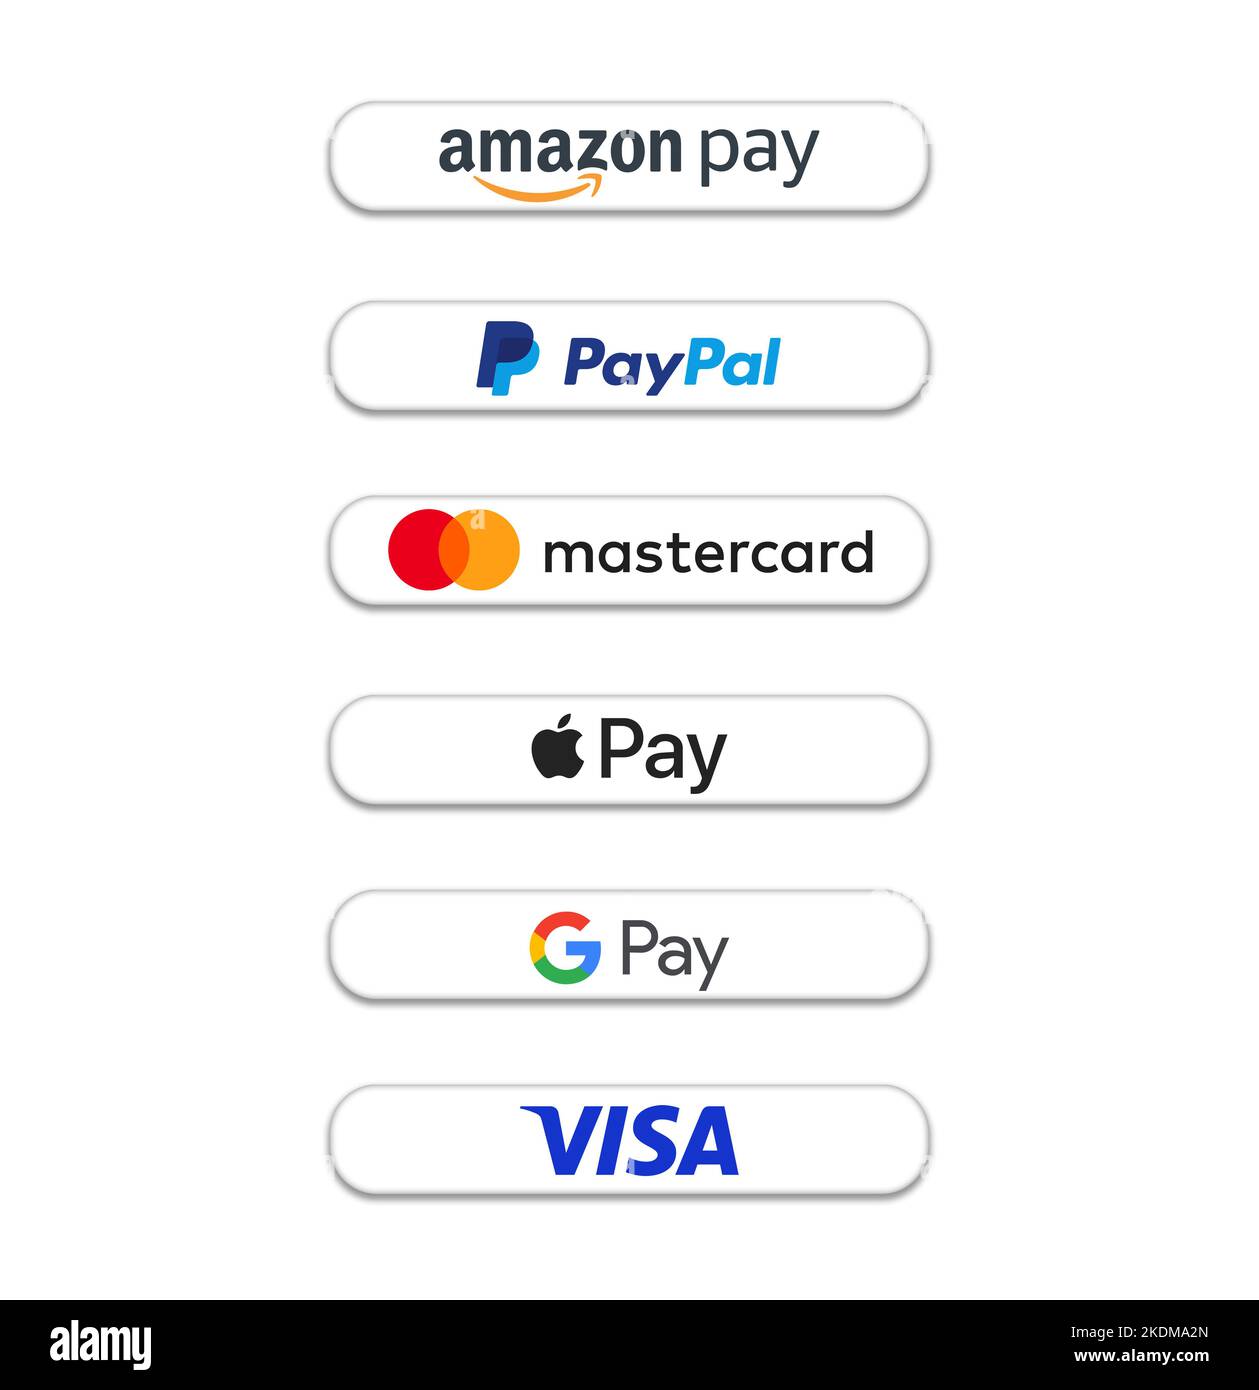 Payment System in America via Amazon Pay, Paypal, Mastercard, Apple Pay, Google Pay and Visa Stock Photo